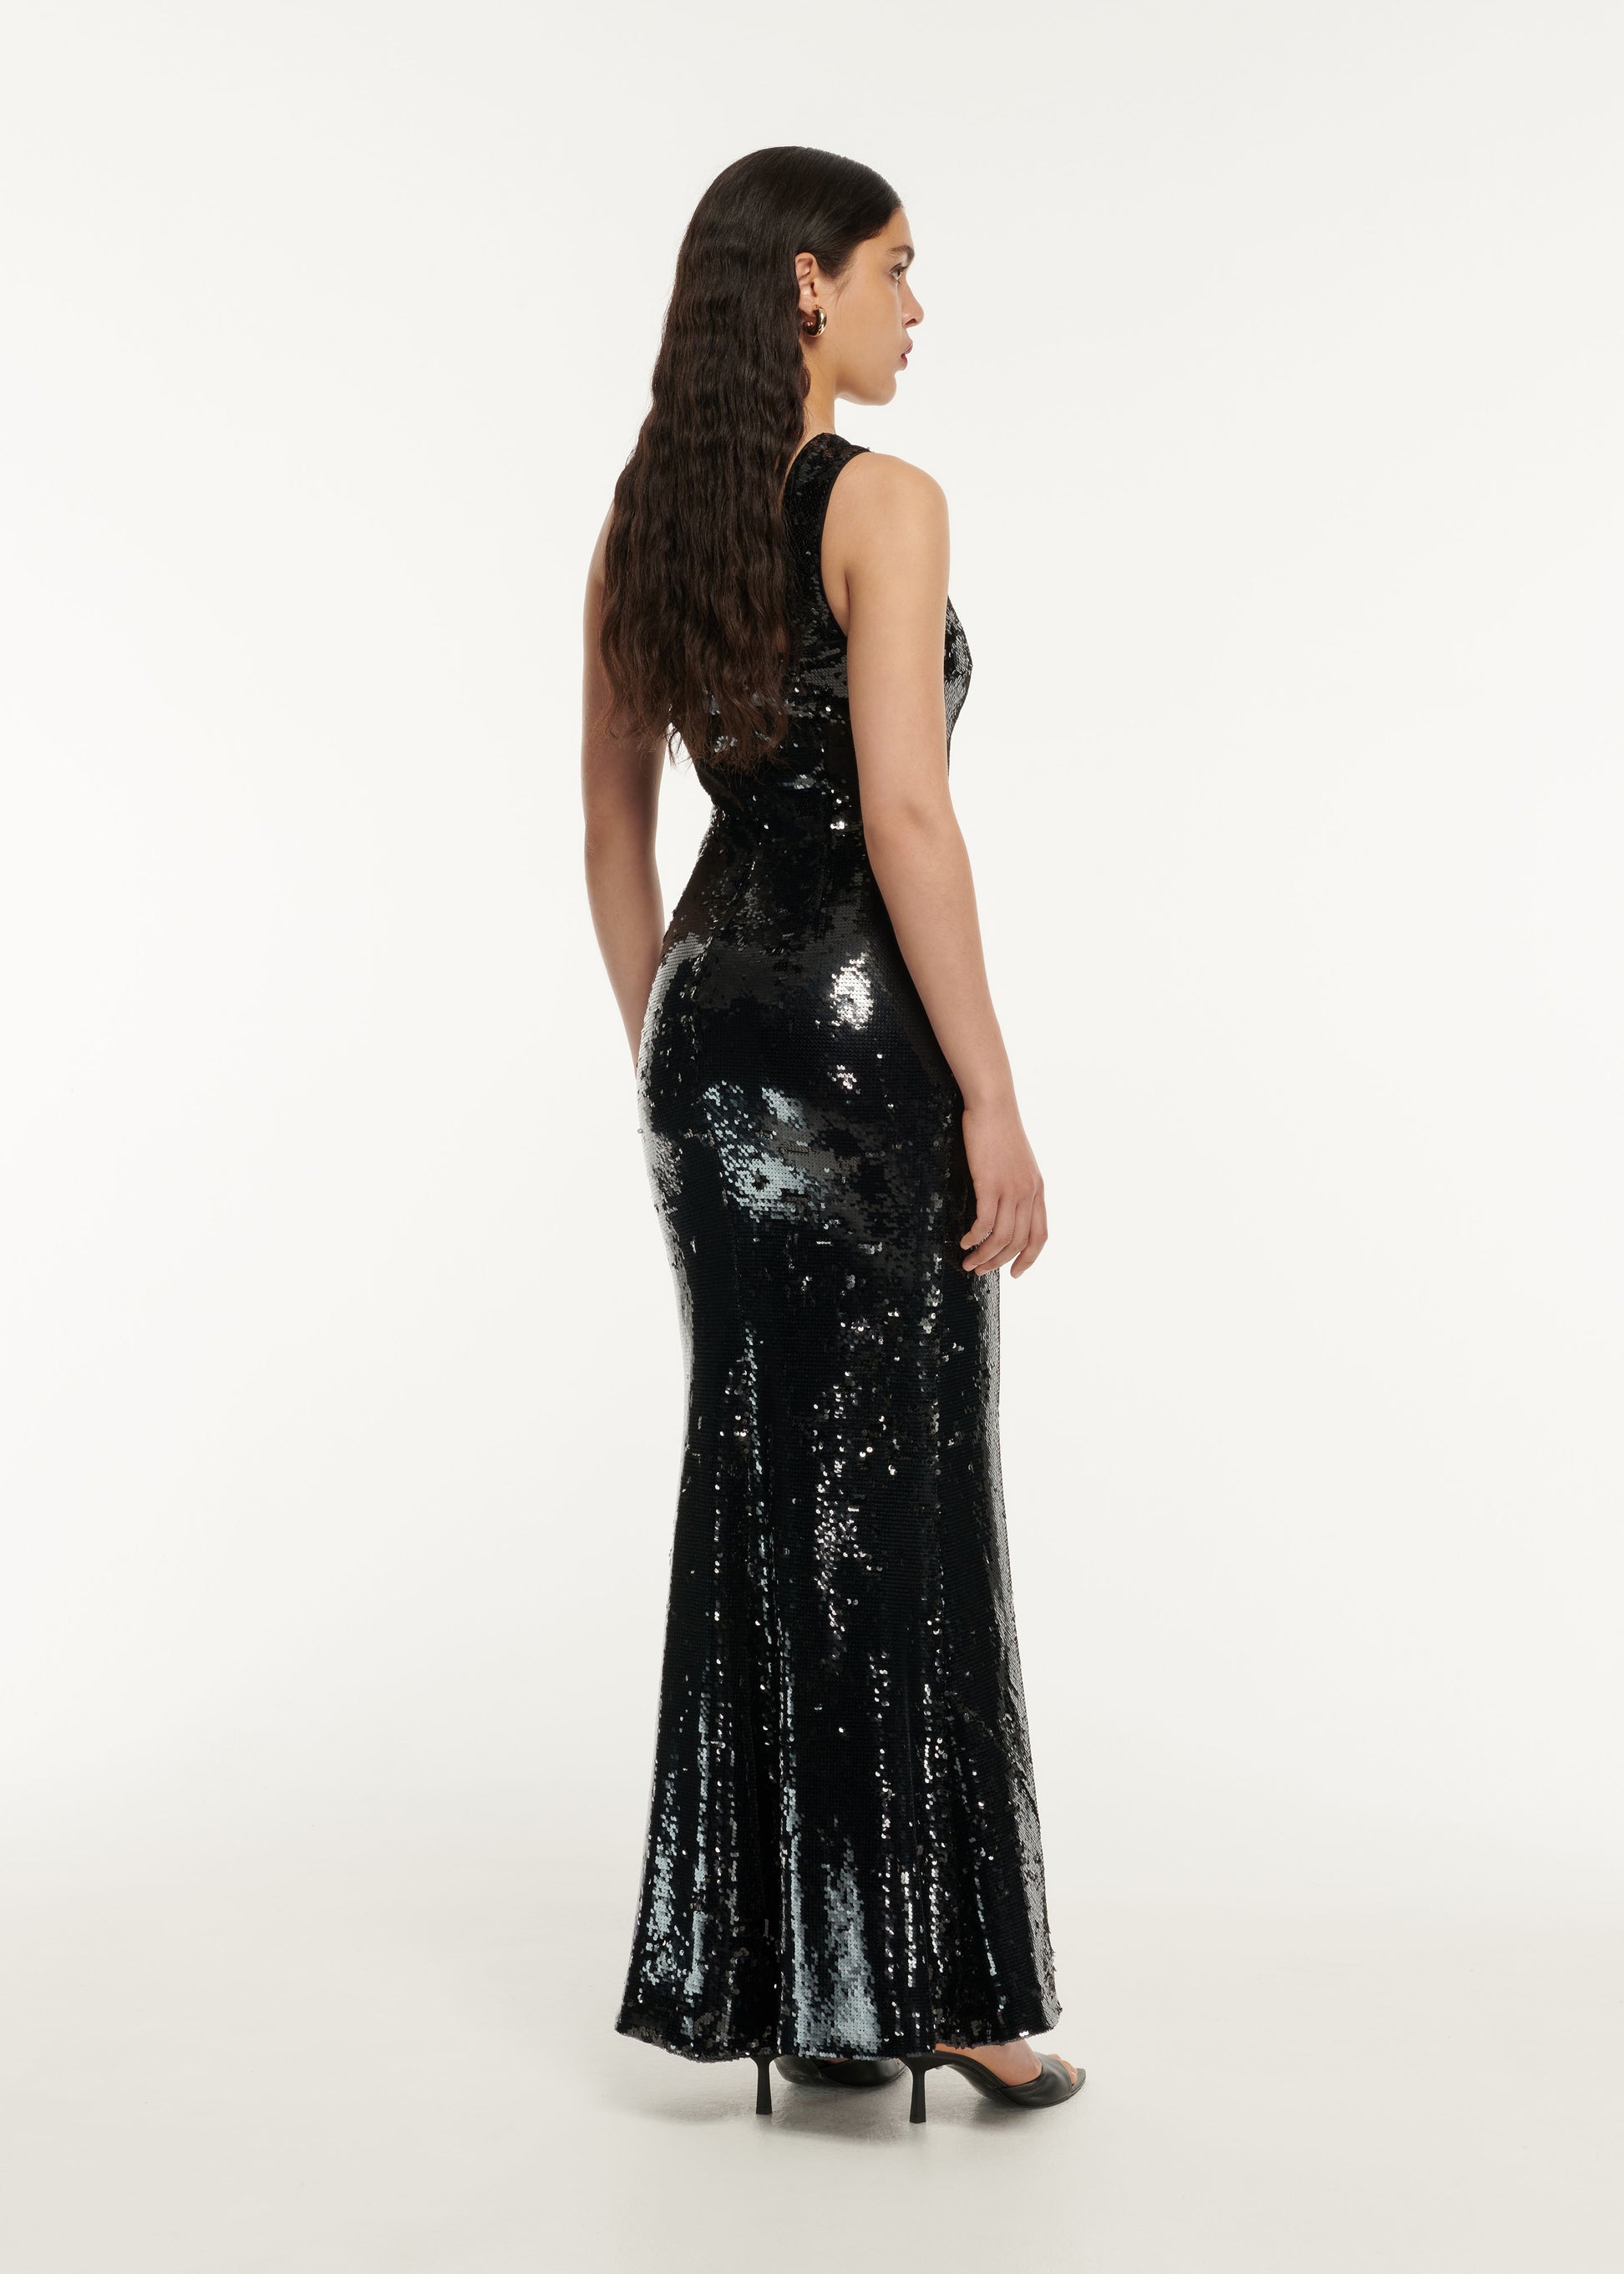 The back of a woman wearing the Cape Satin Crepe Maxi Dress